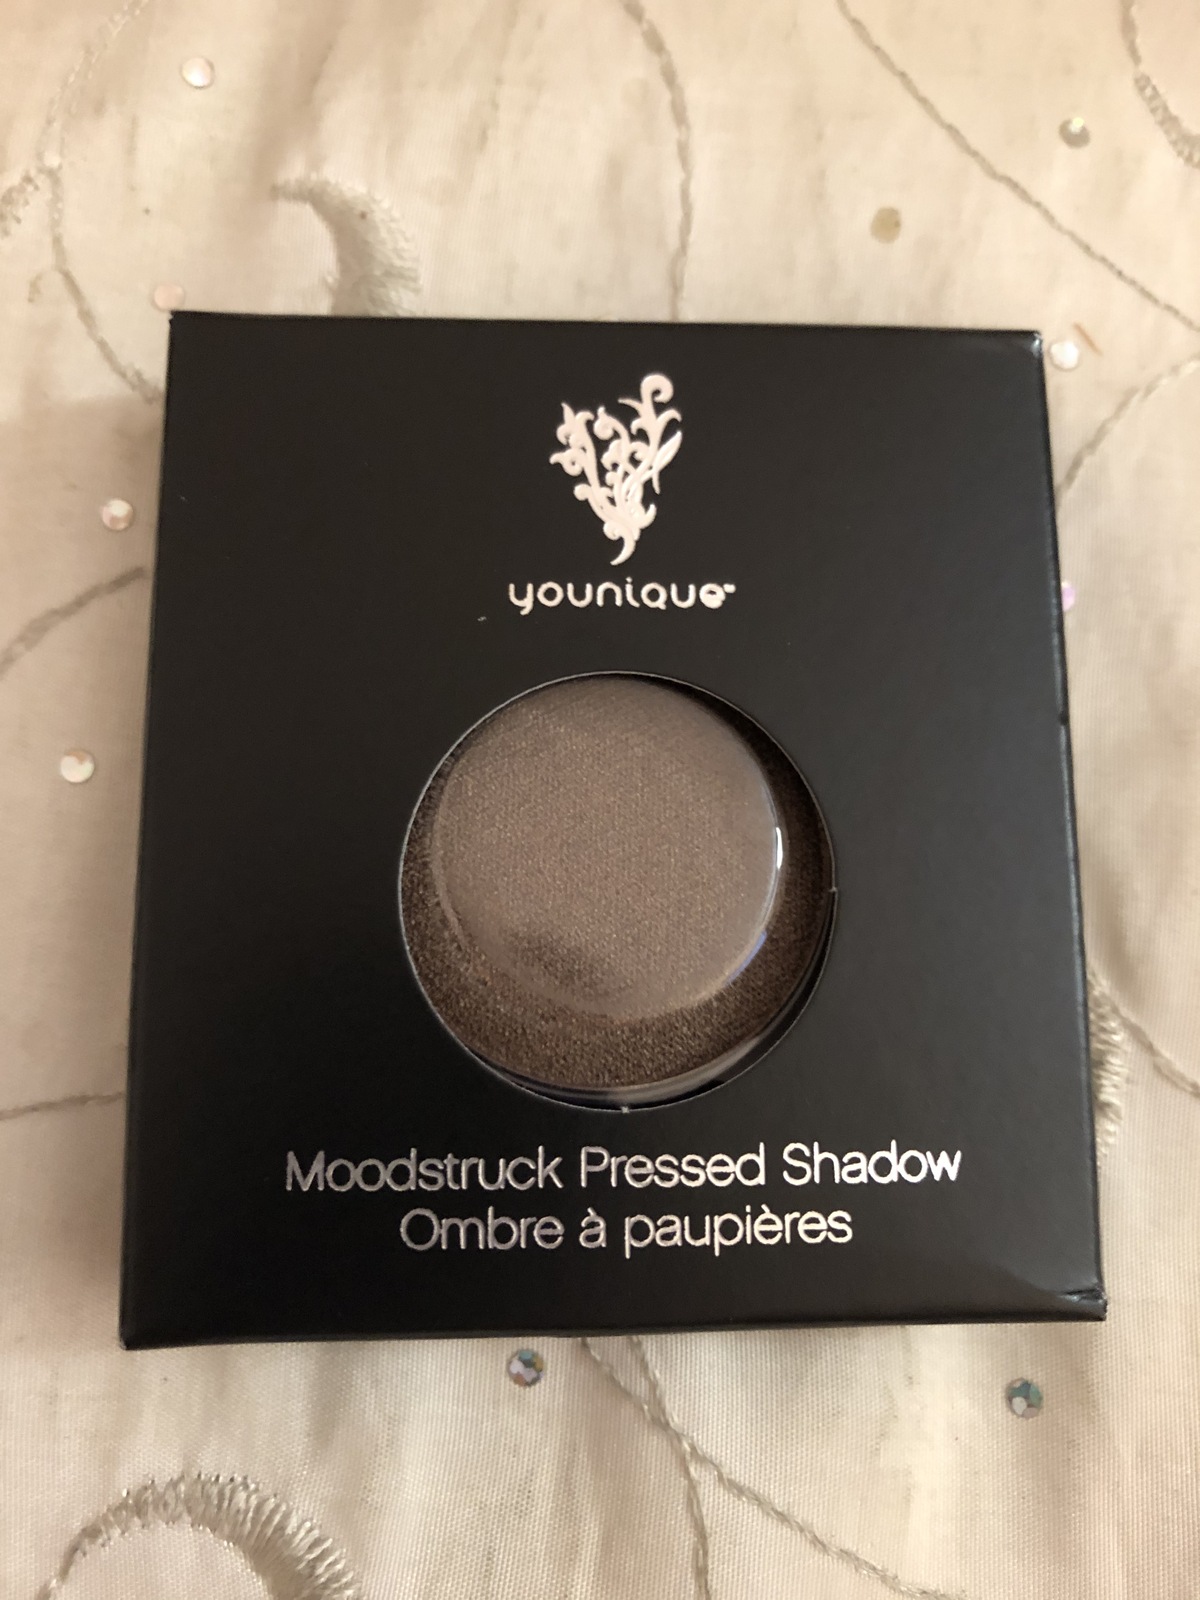 Younique Moodstruck Pressed Shadow Refill DELICIOUS With Compact - $17.95